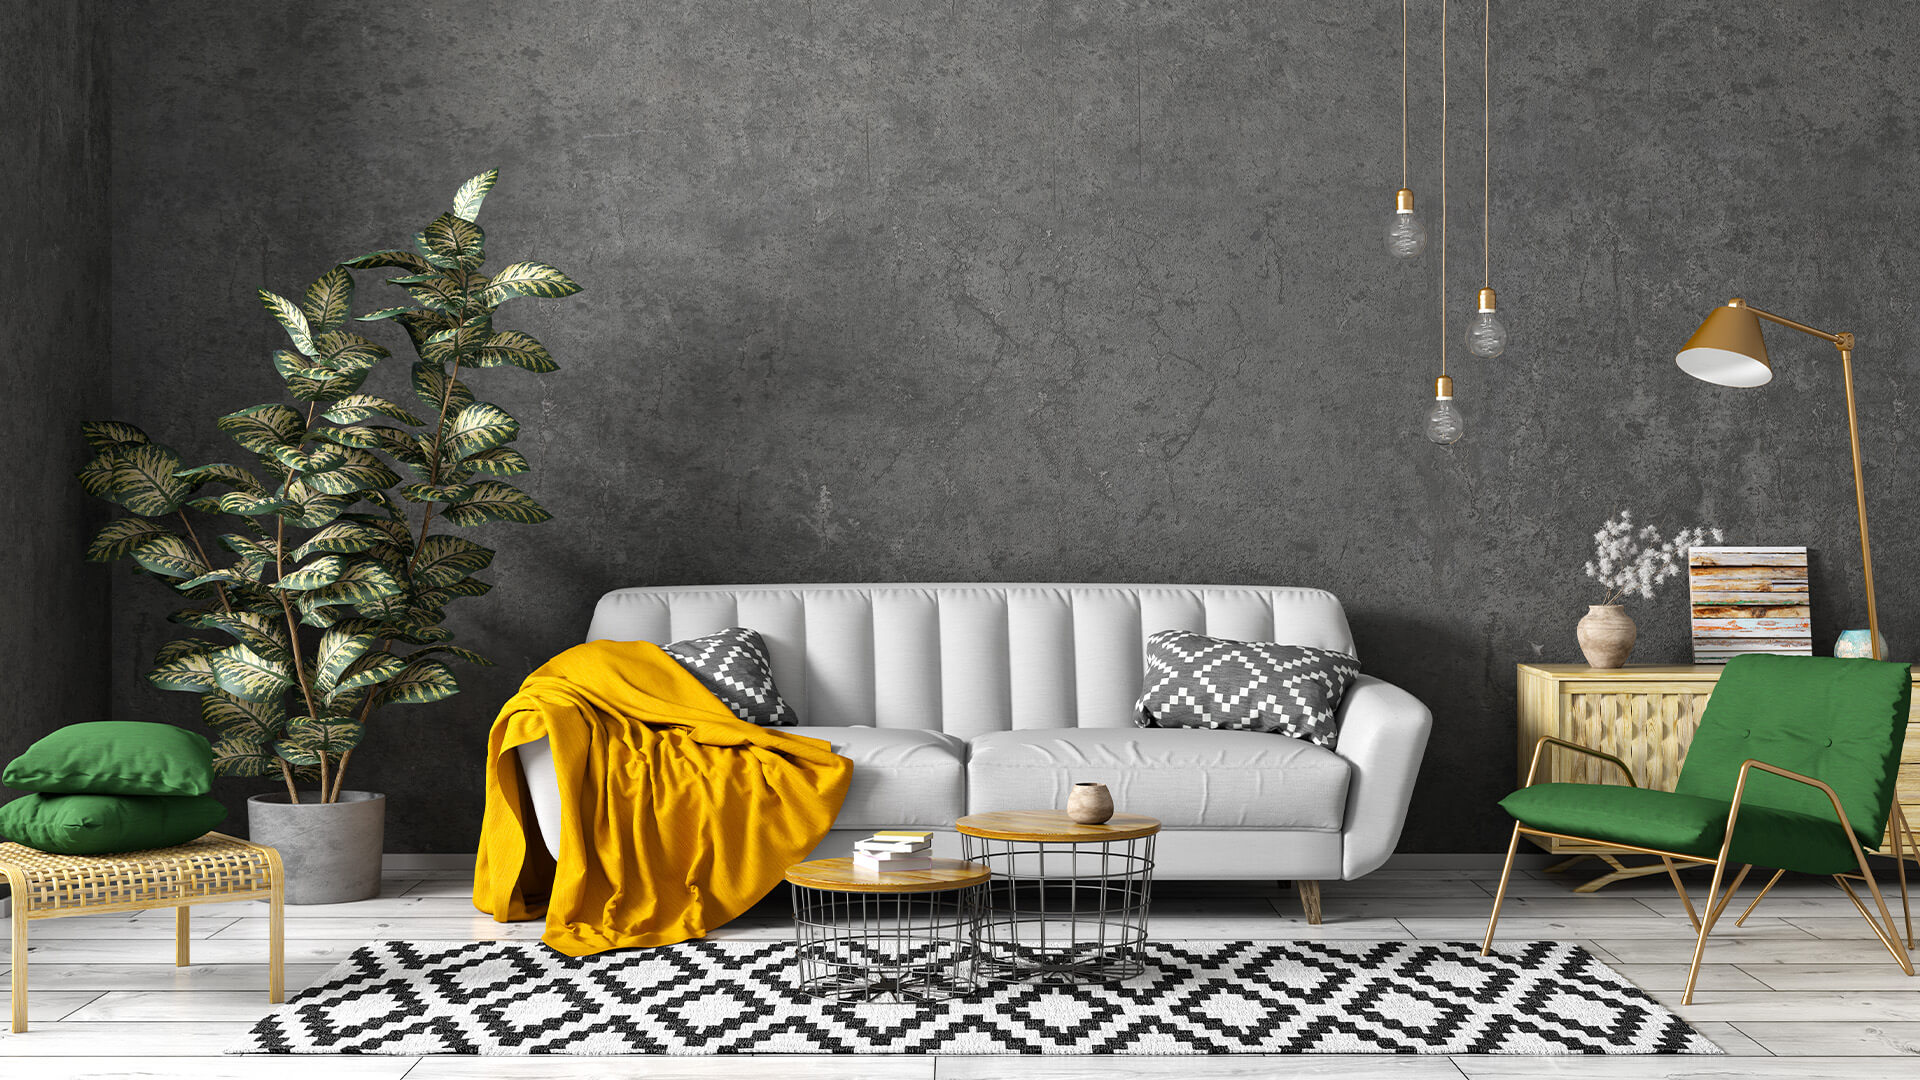 Dark grey wall, light wood laminate flooring, grey sofa, yellow and grey accesories, green chairs, plant, gold light fittings